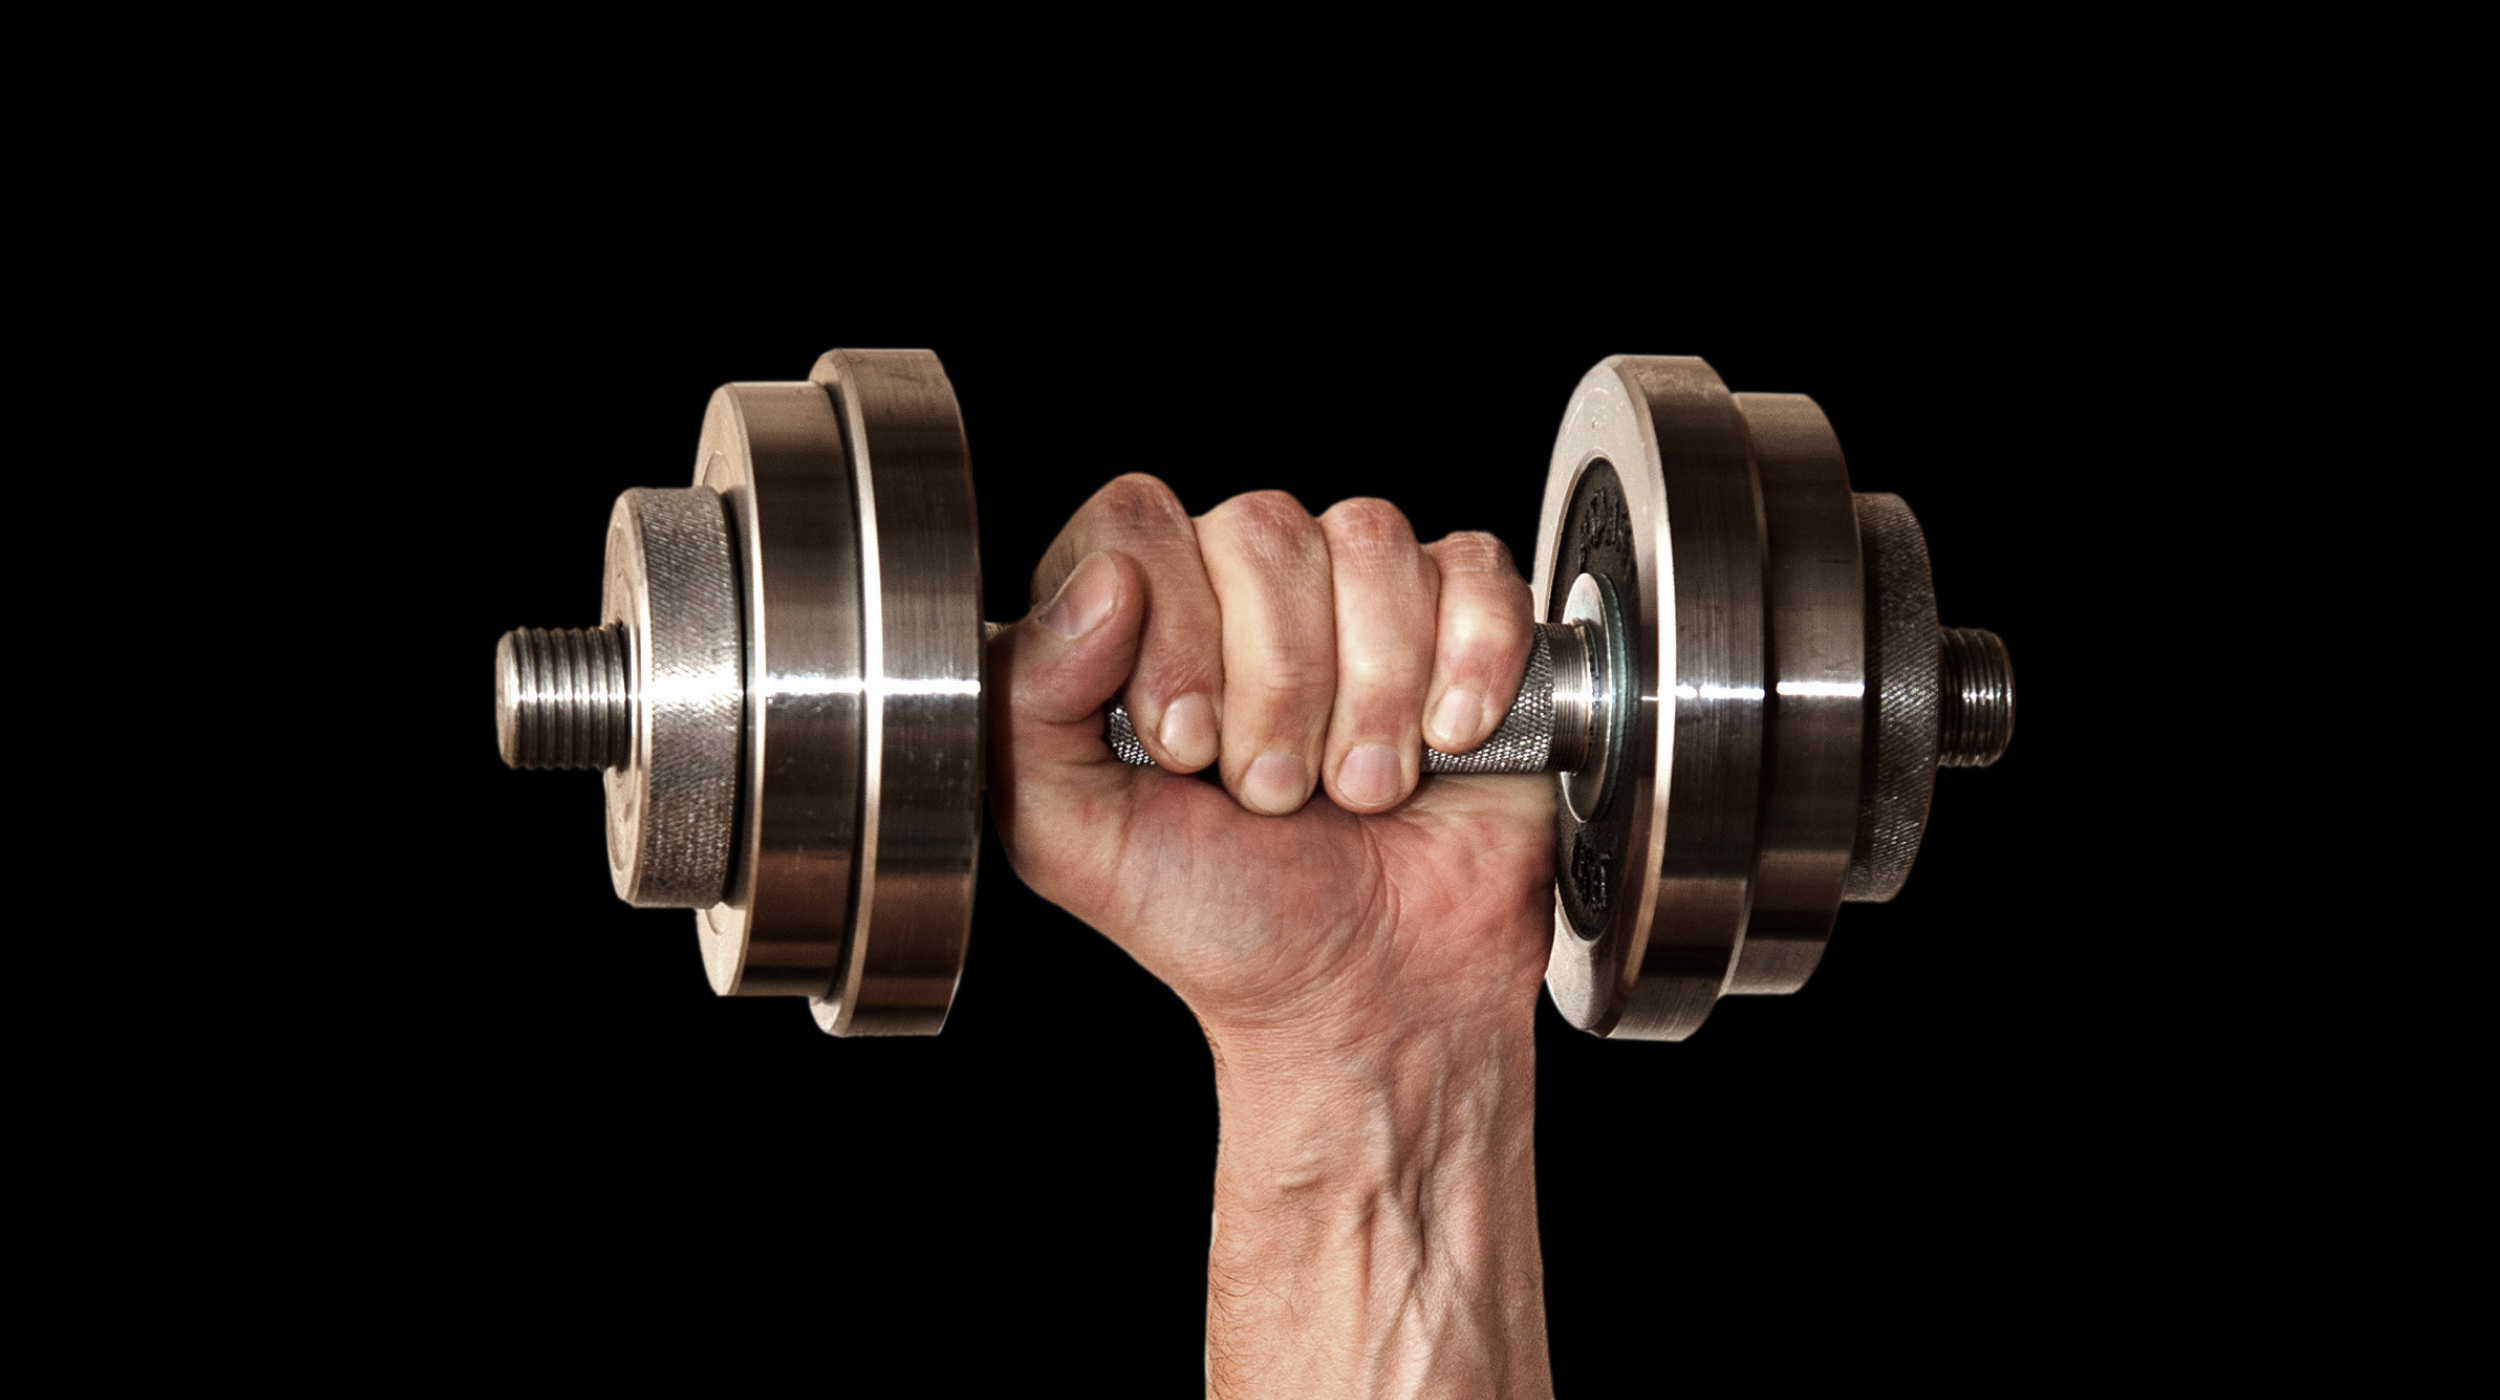 A man's hand holding a pair of dumbbells on a black background.